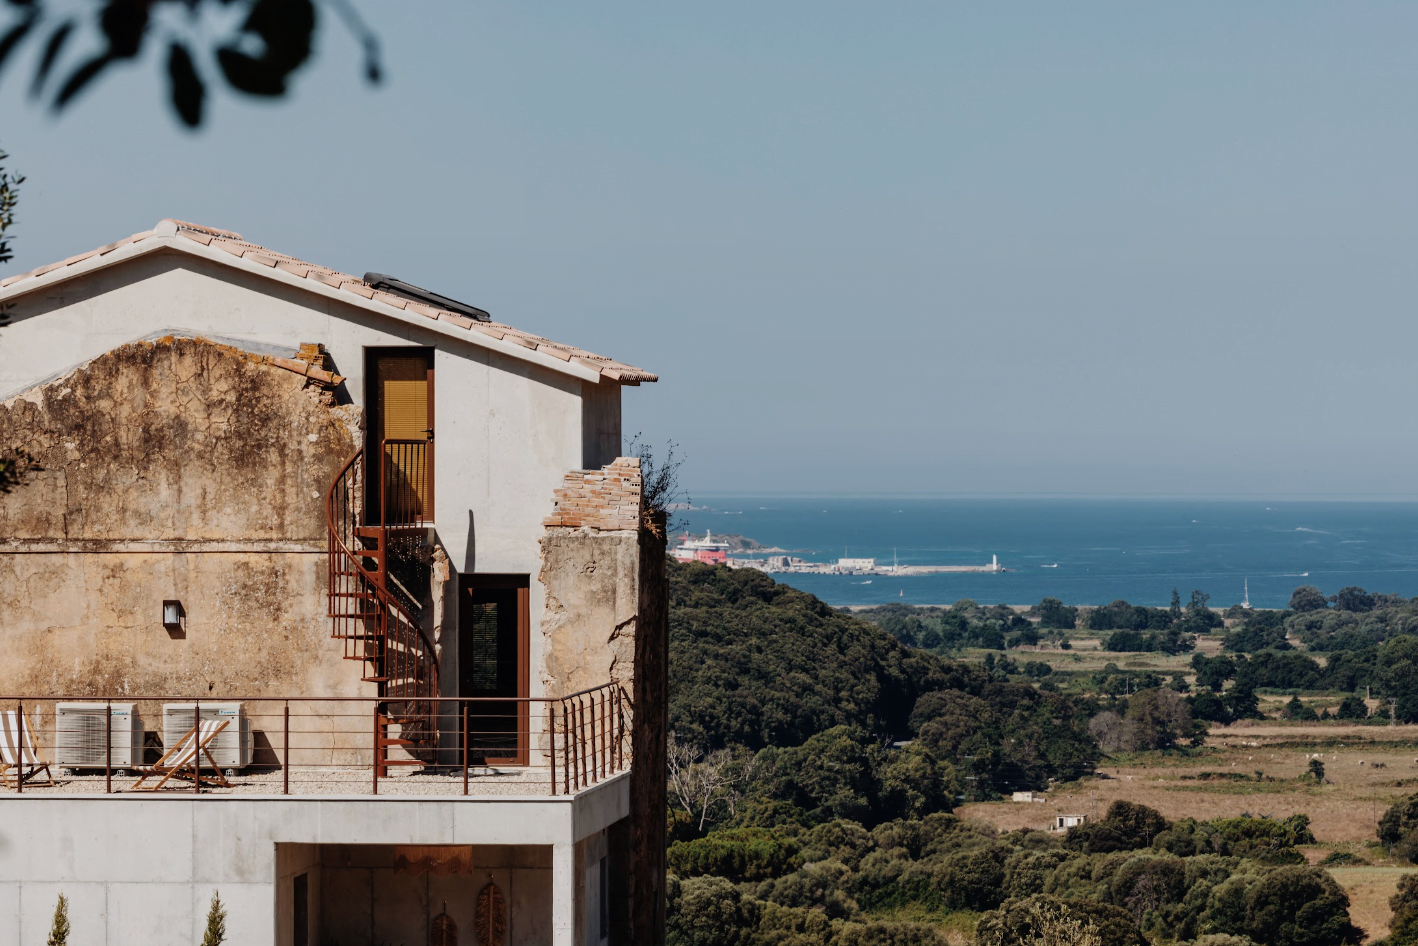 The facade of the renovated house, with an iron staircase leading up to the terrace on the upper floor. Fields, forests, and the sea in the background.